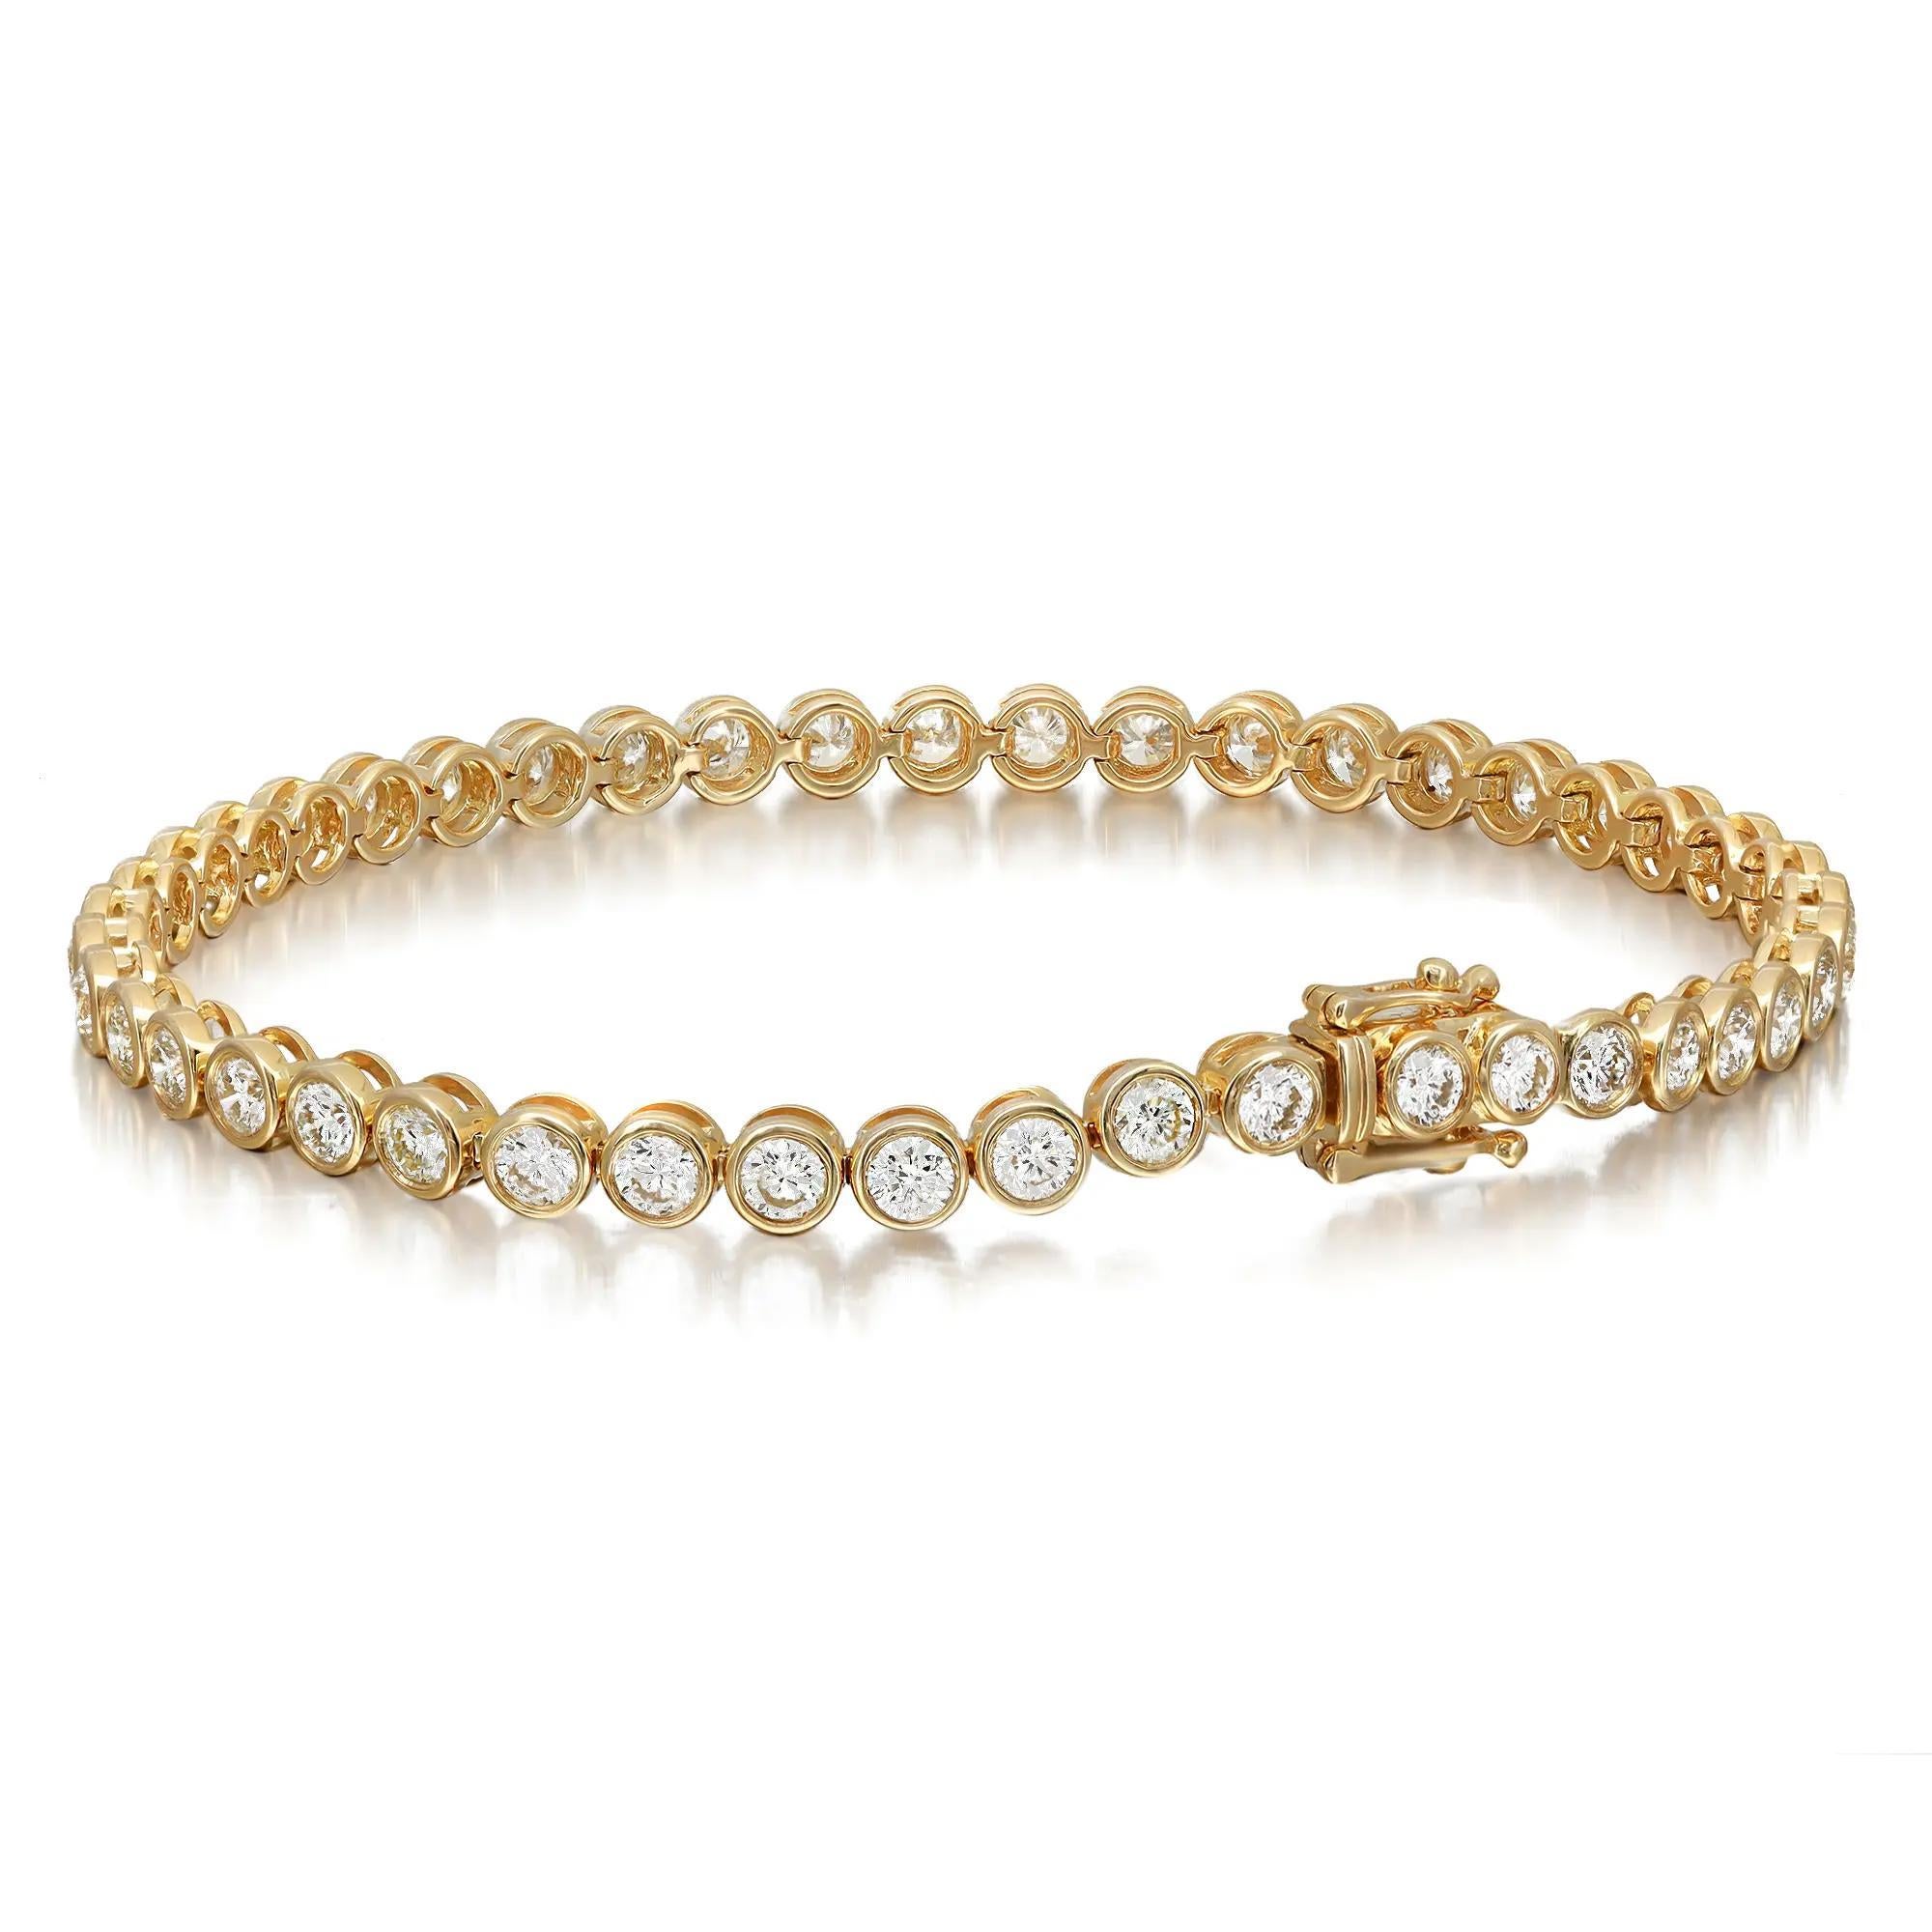 Get a classic look with easy elegance. This diamond tennis bracelet is expertly crafted in 18K yellow gold. Features 45 bezel set dazzling round cut diamonds with a total weight of 3.98 carats. Diamond color G-H and VS-SI clarity. Bracelet length: 7